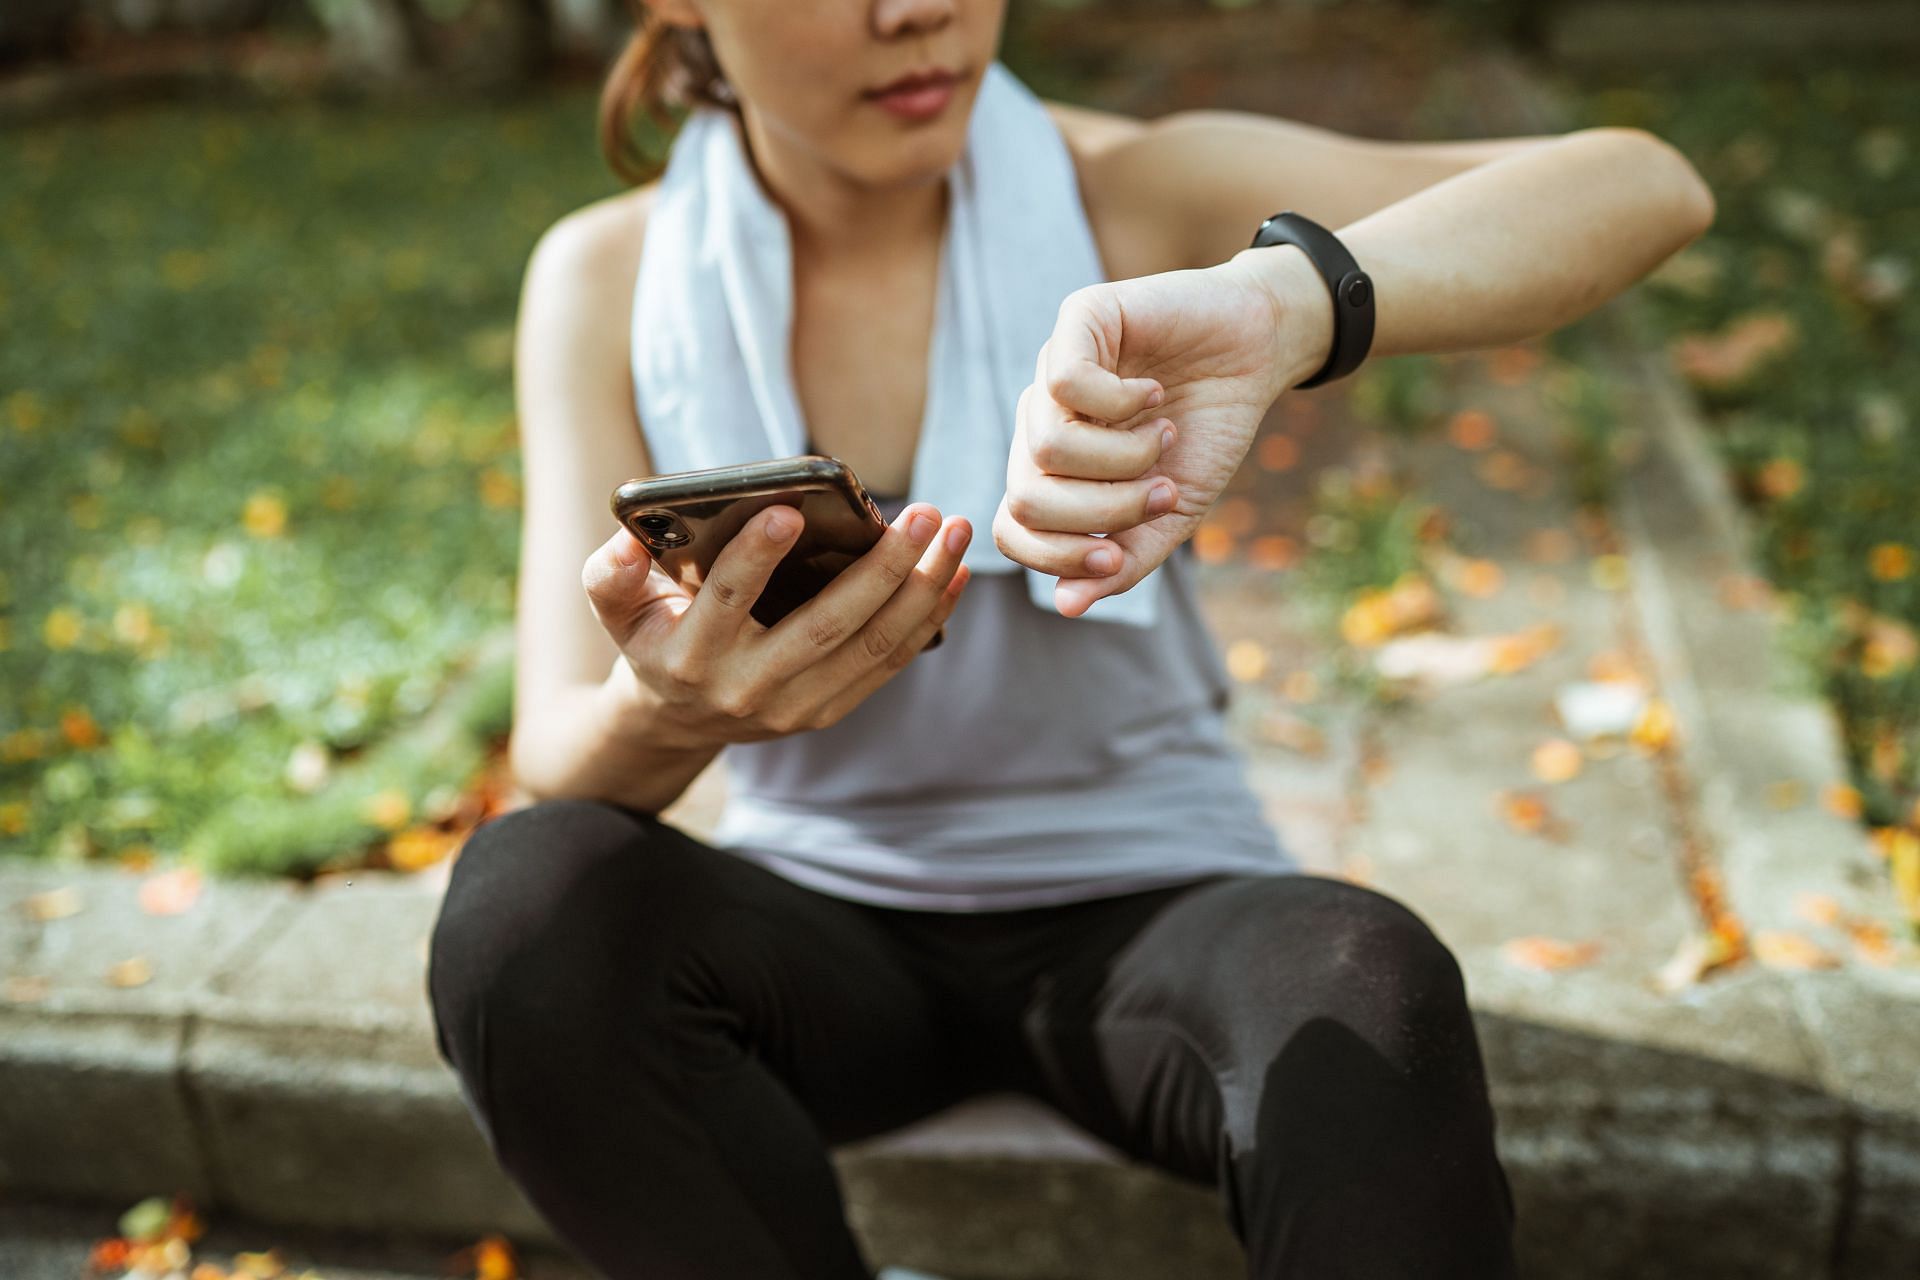 Here are the best fitness workout apps for you to try! (image via pexels/Ketut Subiyanto)